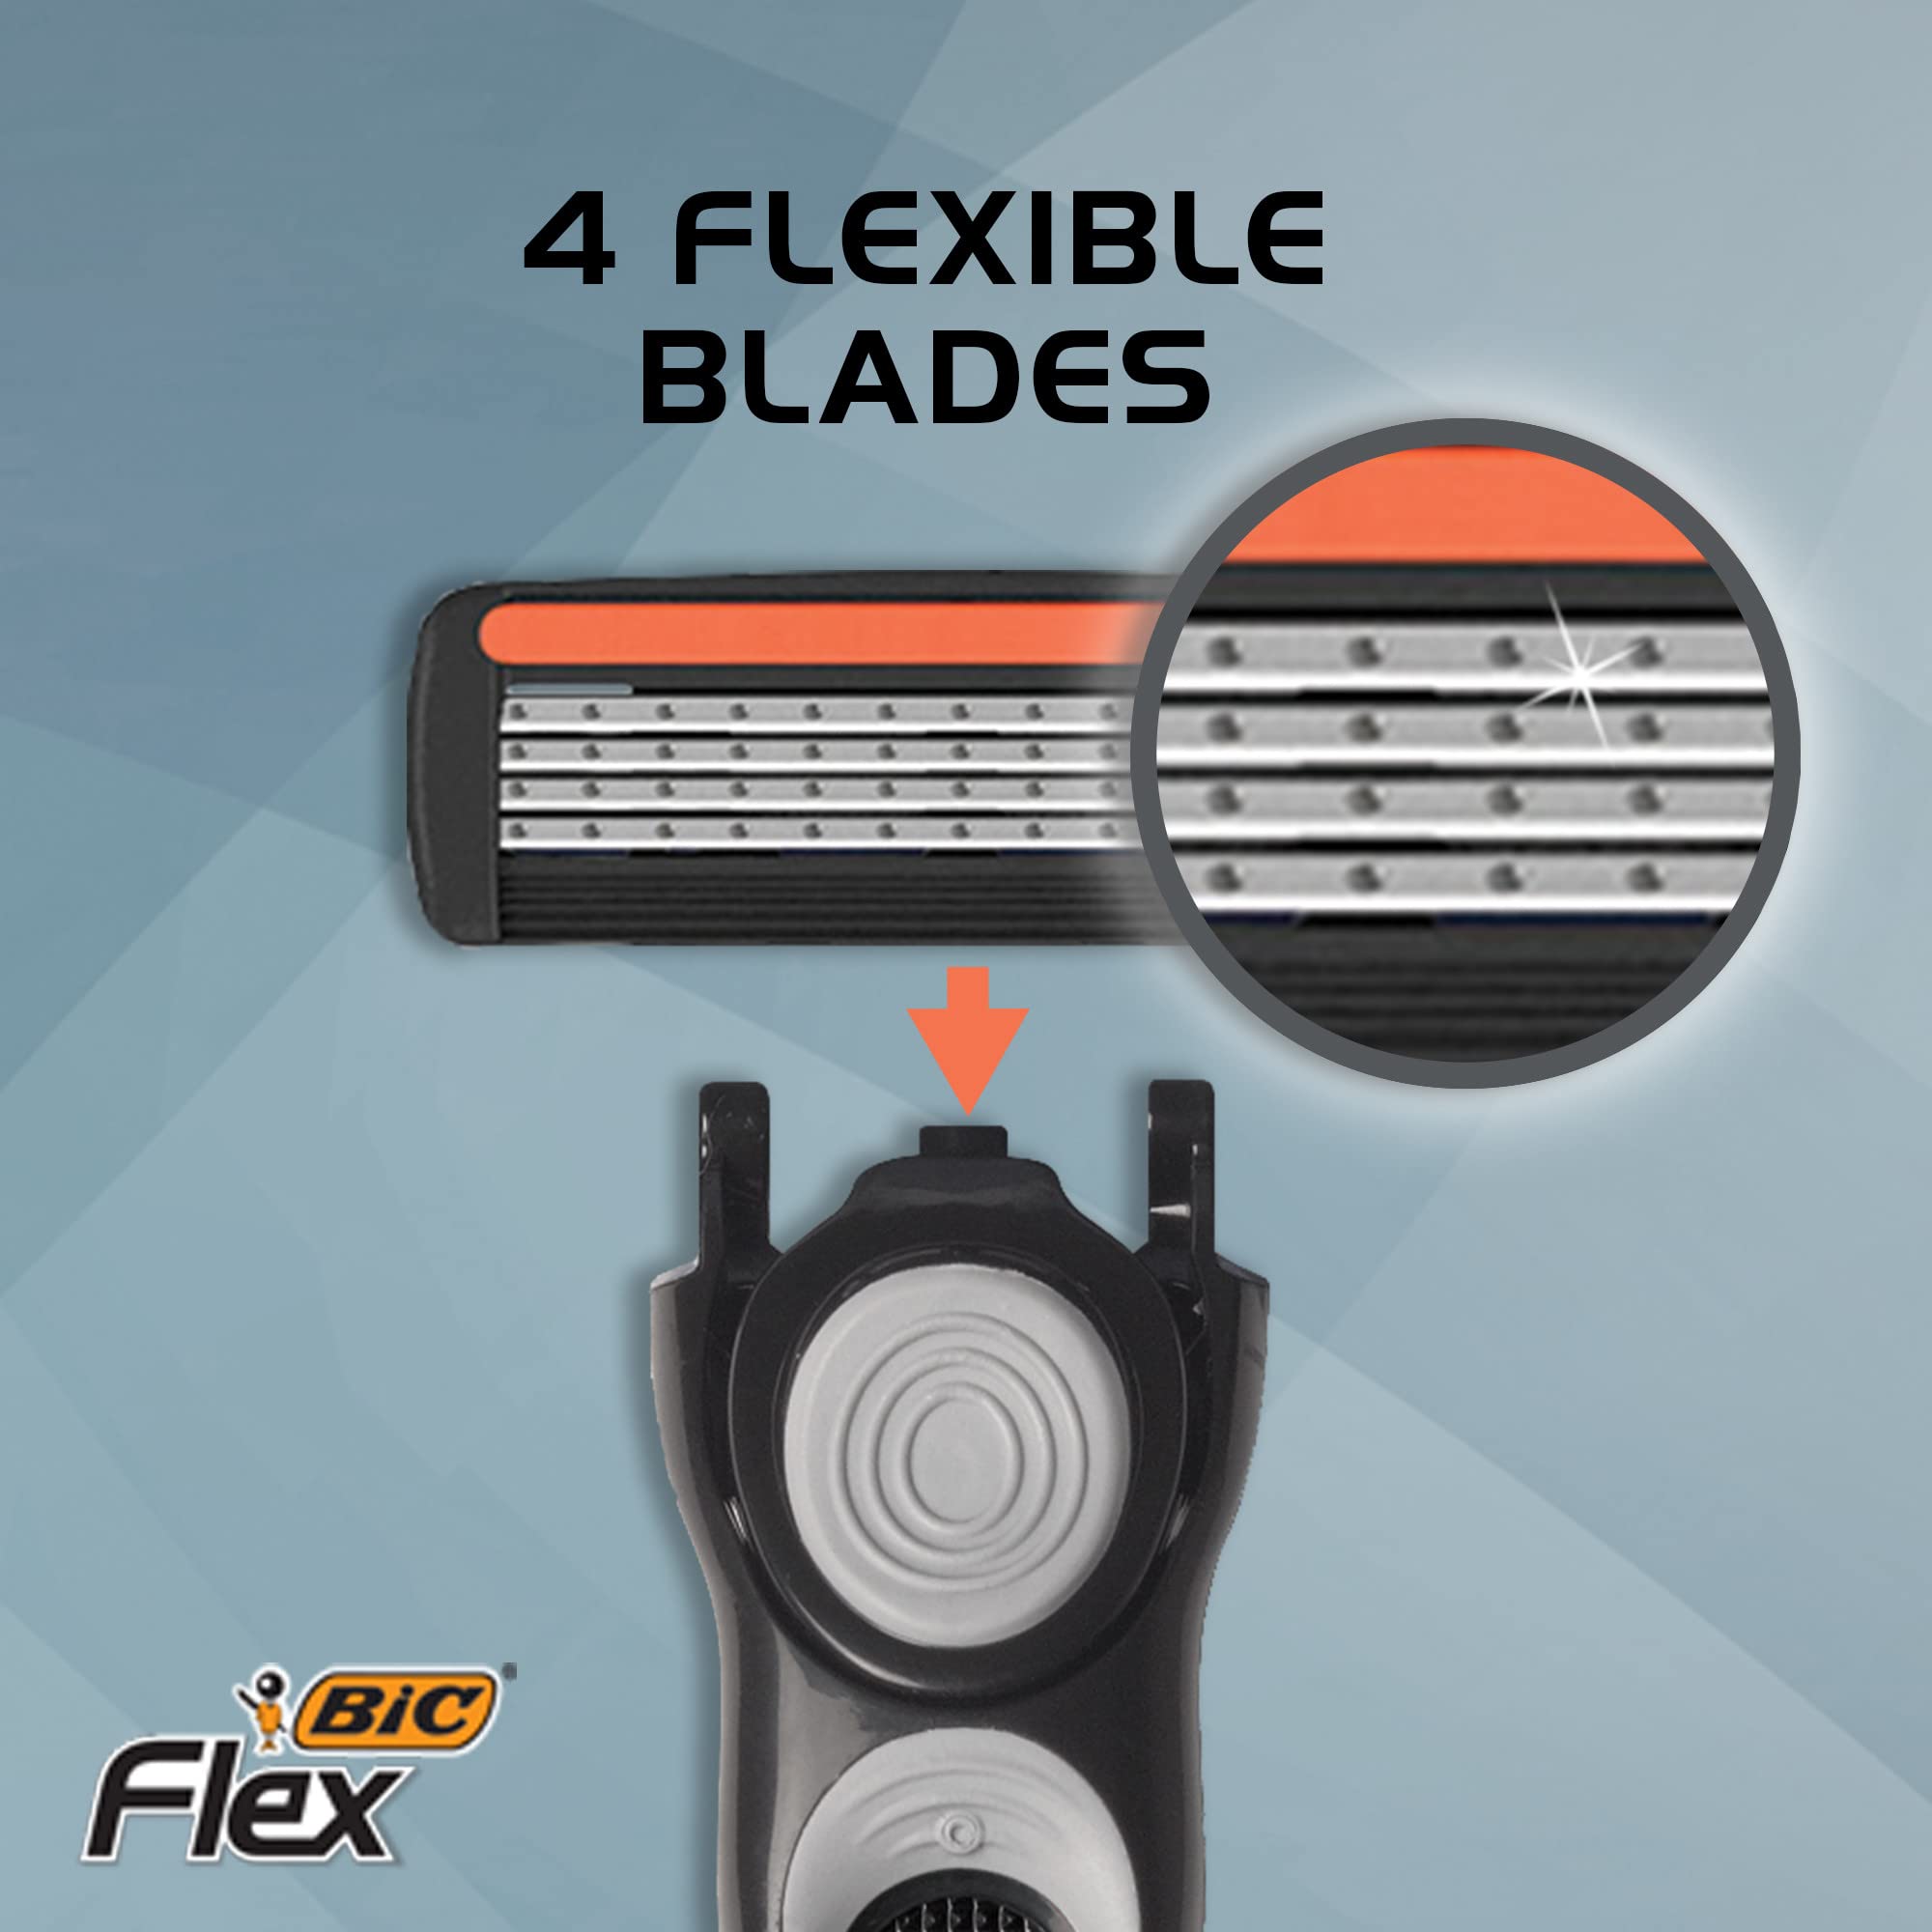 BIC Flex 4 Refillable Men's Disposable Razors, For a Smooth, Ultra-Close and Comfortable Shave, 1 Handle and 4 Cartridges, 5 Piece Razor Set